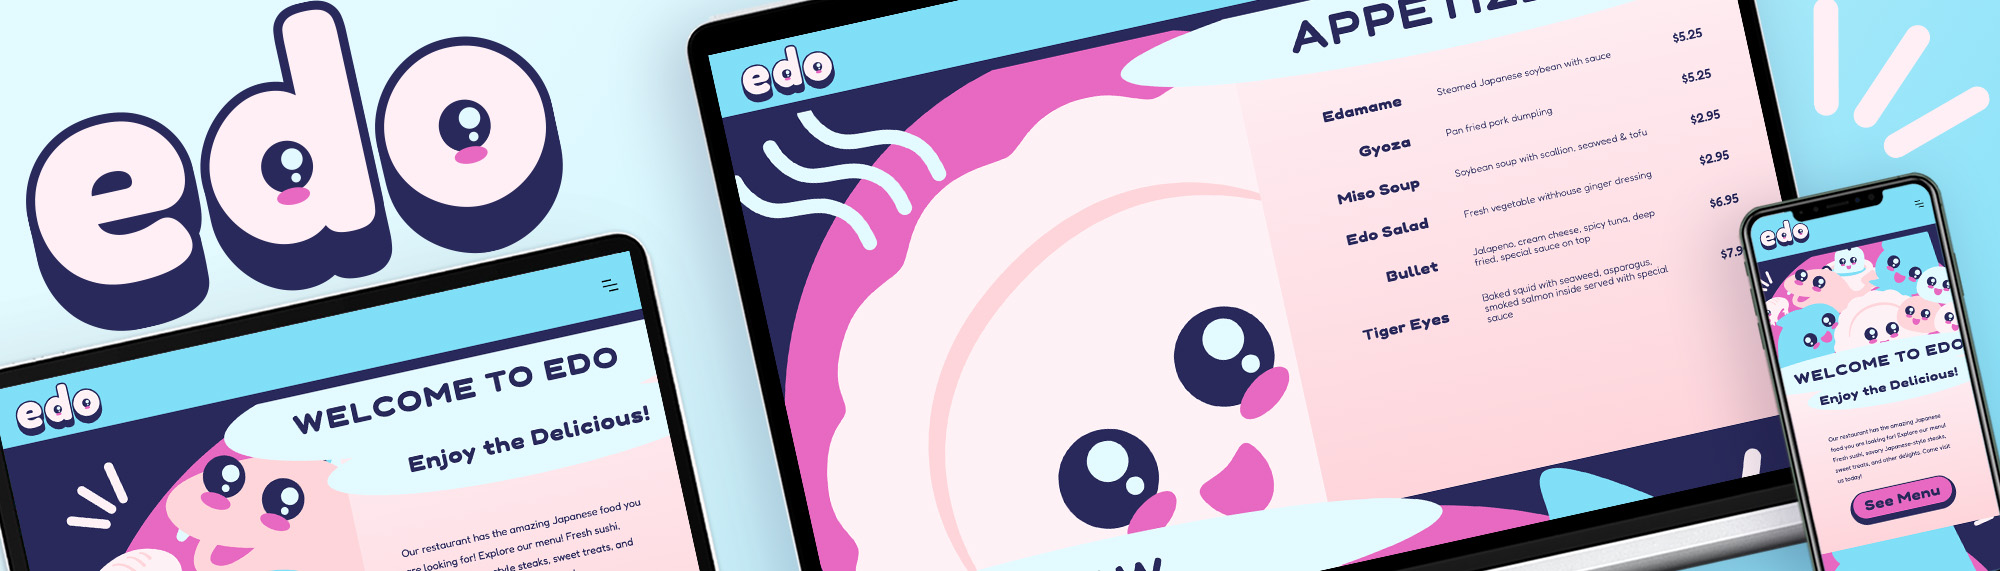 cute characters on device screens